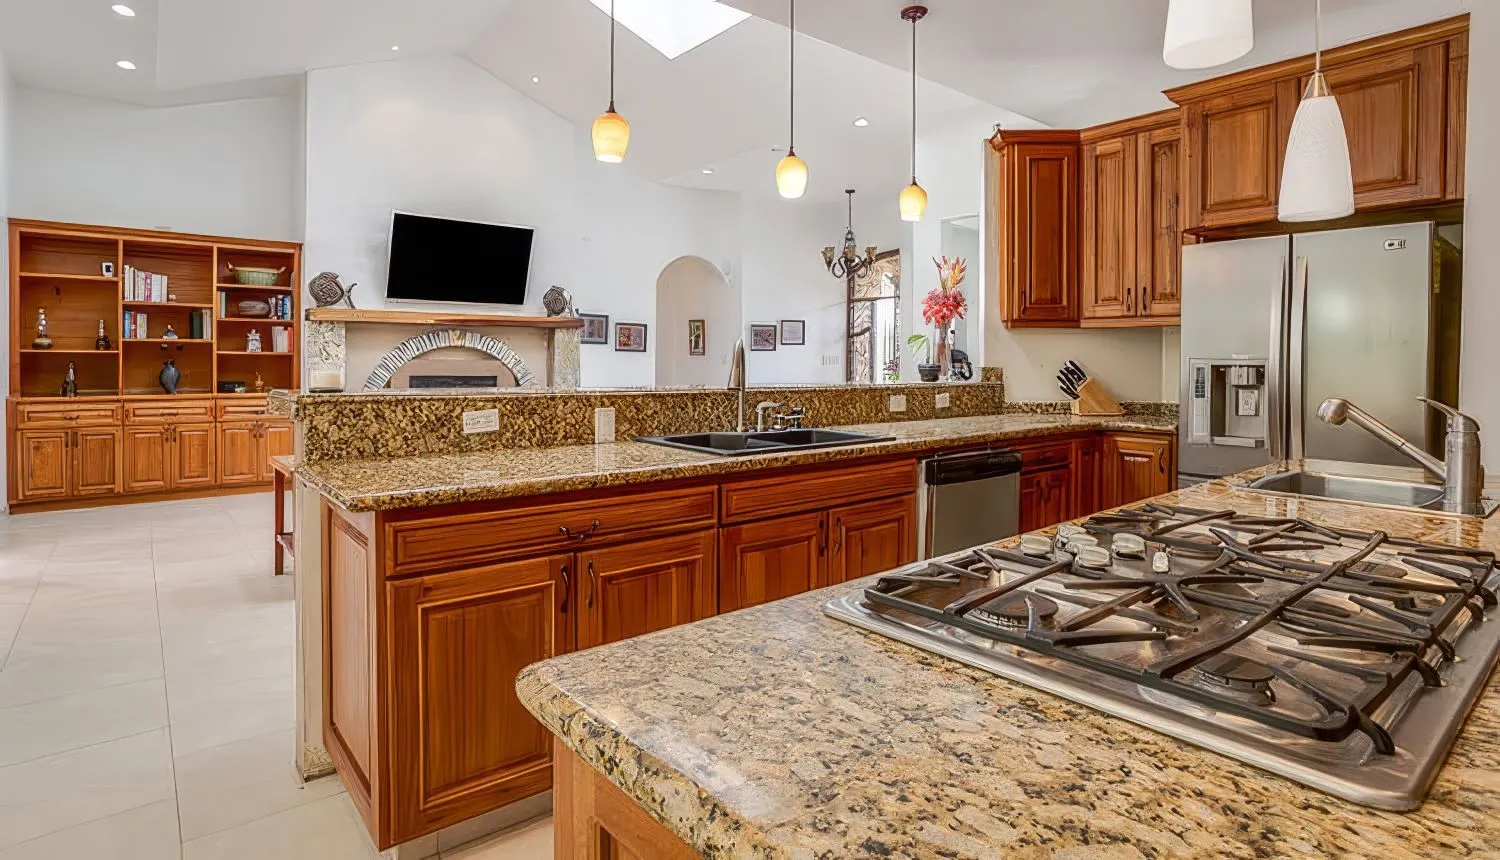 Granite is a popular material for high-end kitchens because of the sophisticated look it can achieve and the depth and character it adds to any space.